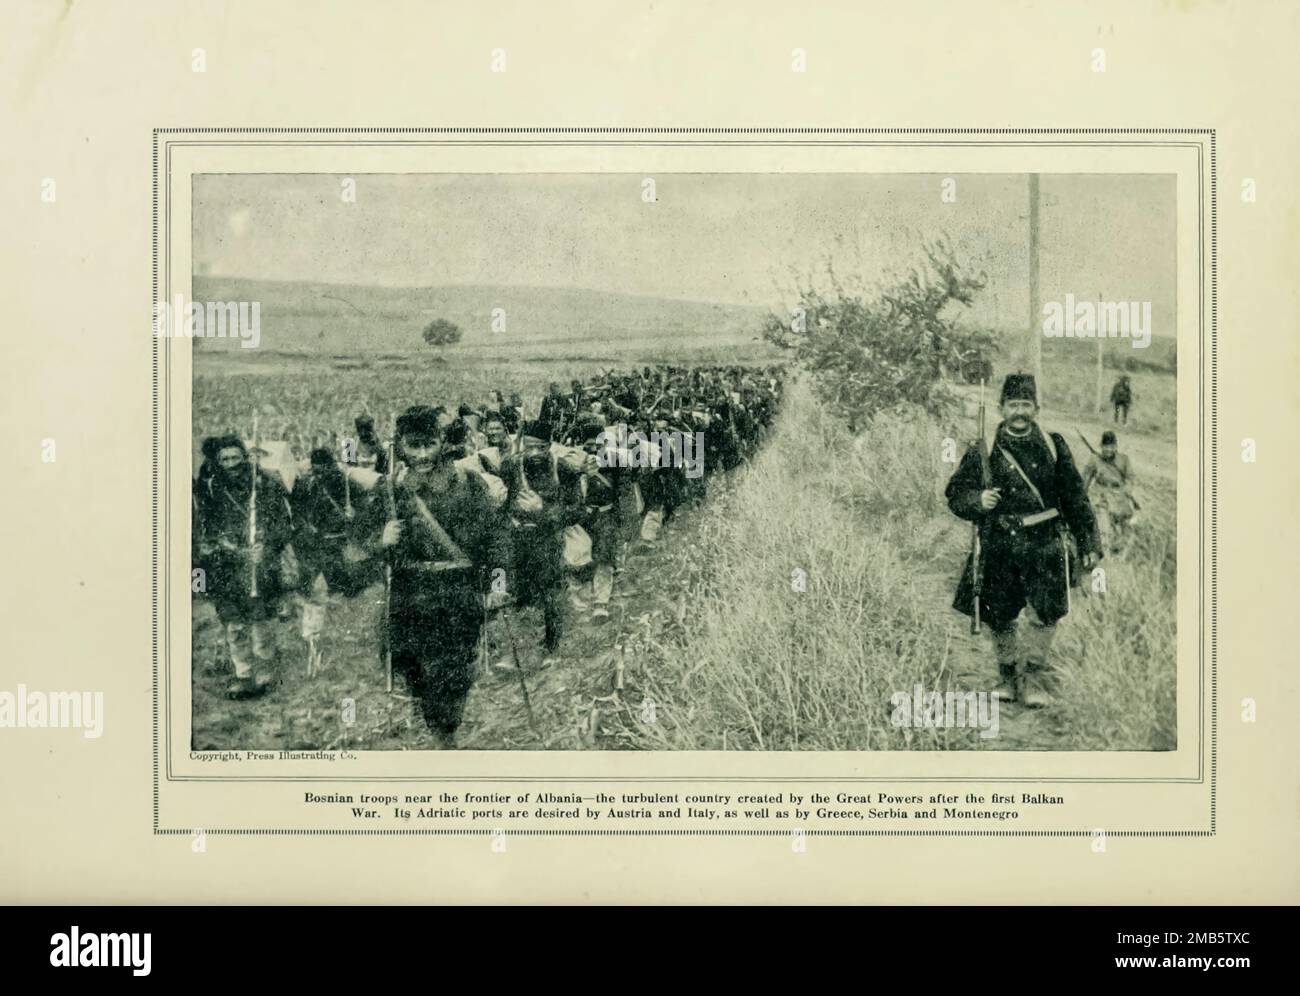 Bosnian Troops Marching into Albania from the book The story of the great war; the complete historical records of events to date DIPLOMATIC AND STATE PAPERS by Reynolds, Francis Joseph, 1867-1937; Churchill, Allen Leon; Miller, Francis Trevelyan, 1877-1959; Wood, Leonard, 1860-1927; Knight, Austin Melvin, 1854-1927; Palmer, Frederick, 1873-1958; Simonds, Frank Herbert, 1878-; Ruhl, Arthur Brown, 1876-  Volume VII Published 1920 Stock Photo